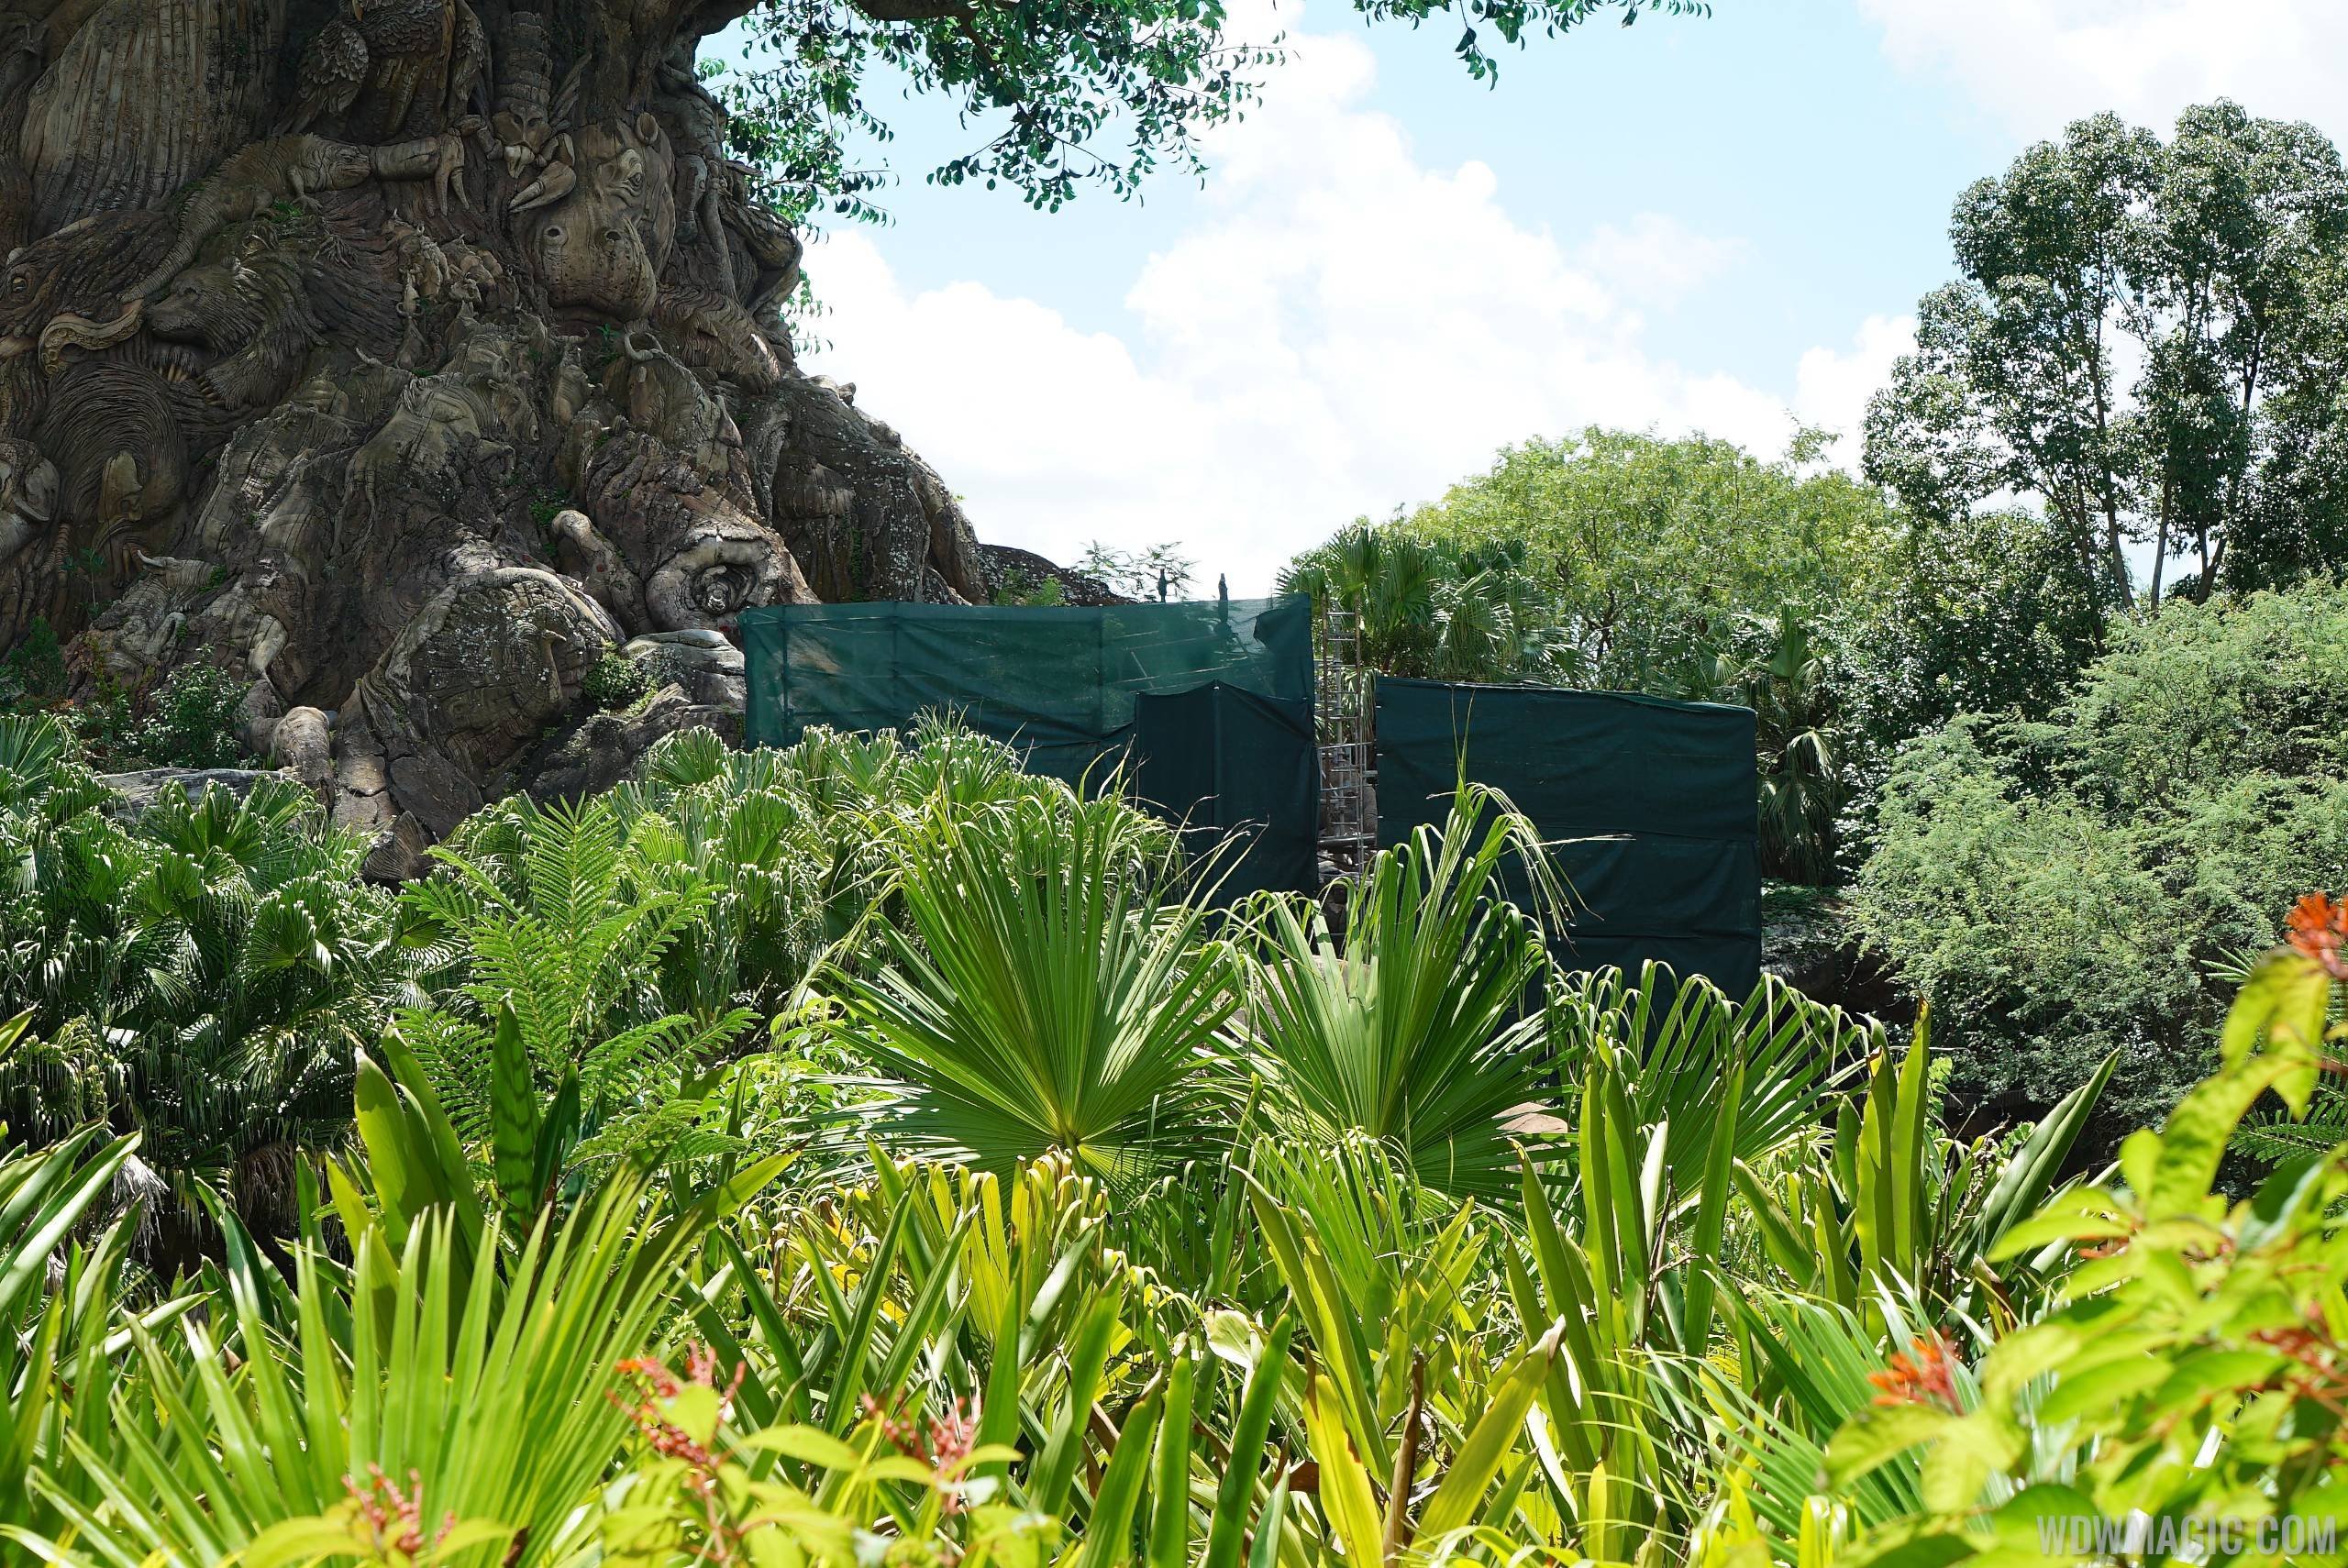 Discovery Island expansion